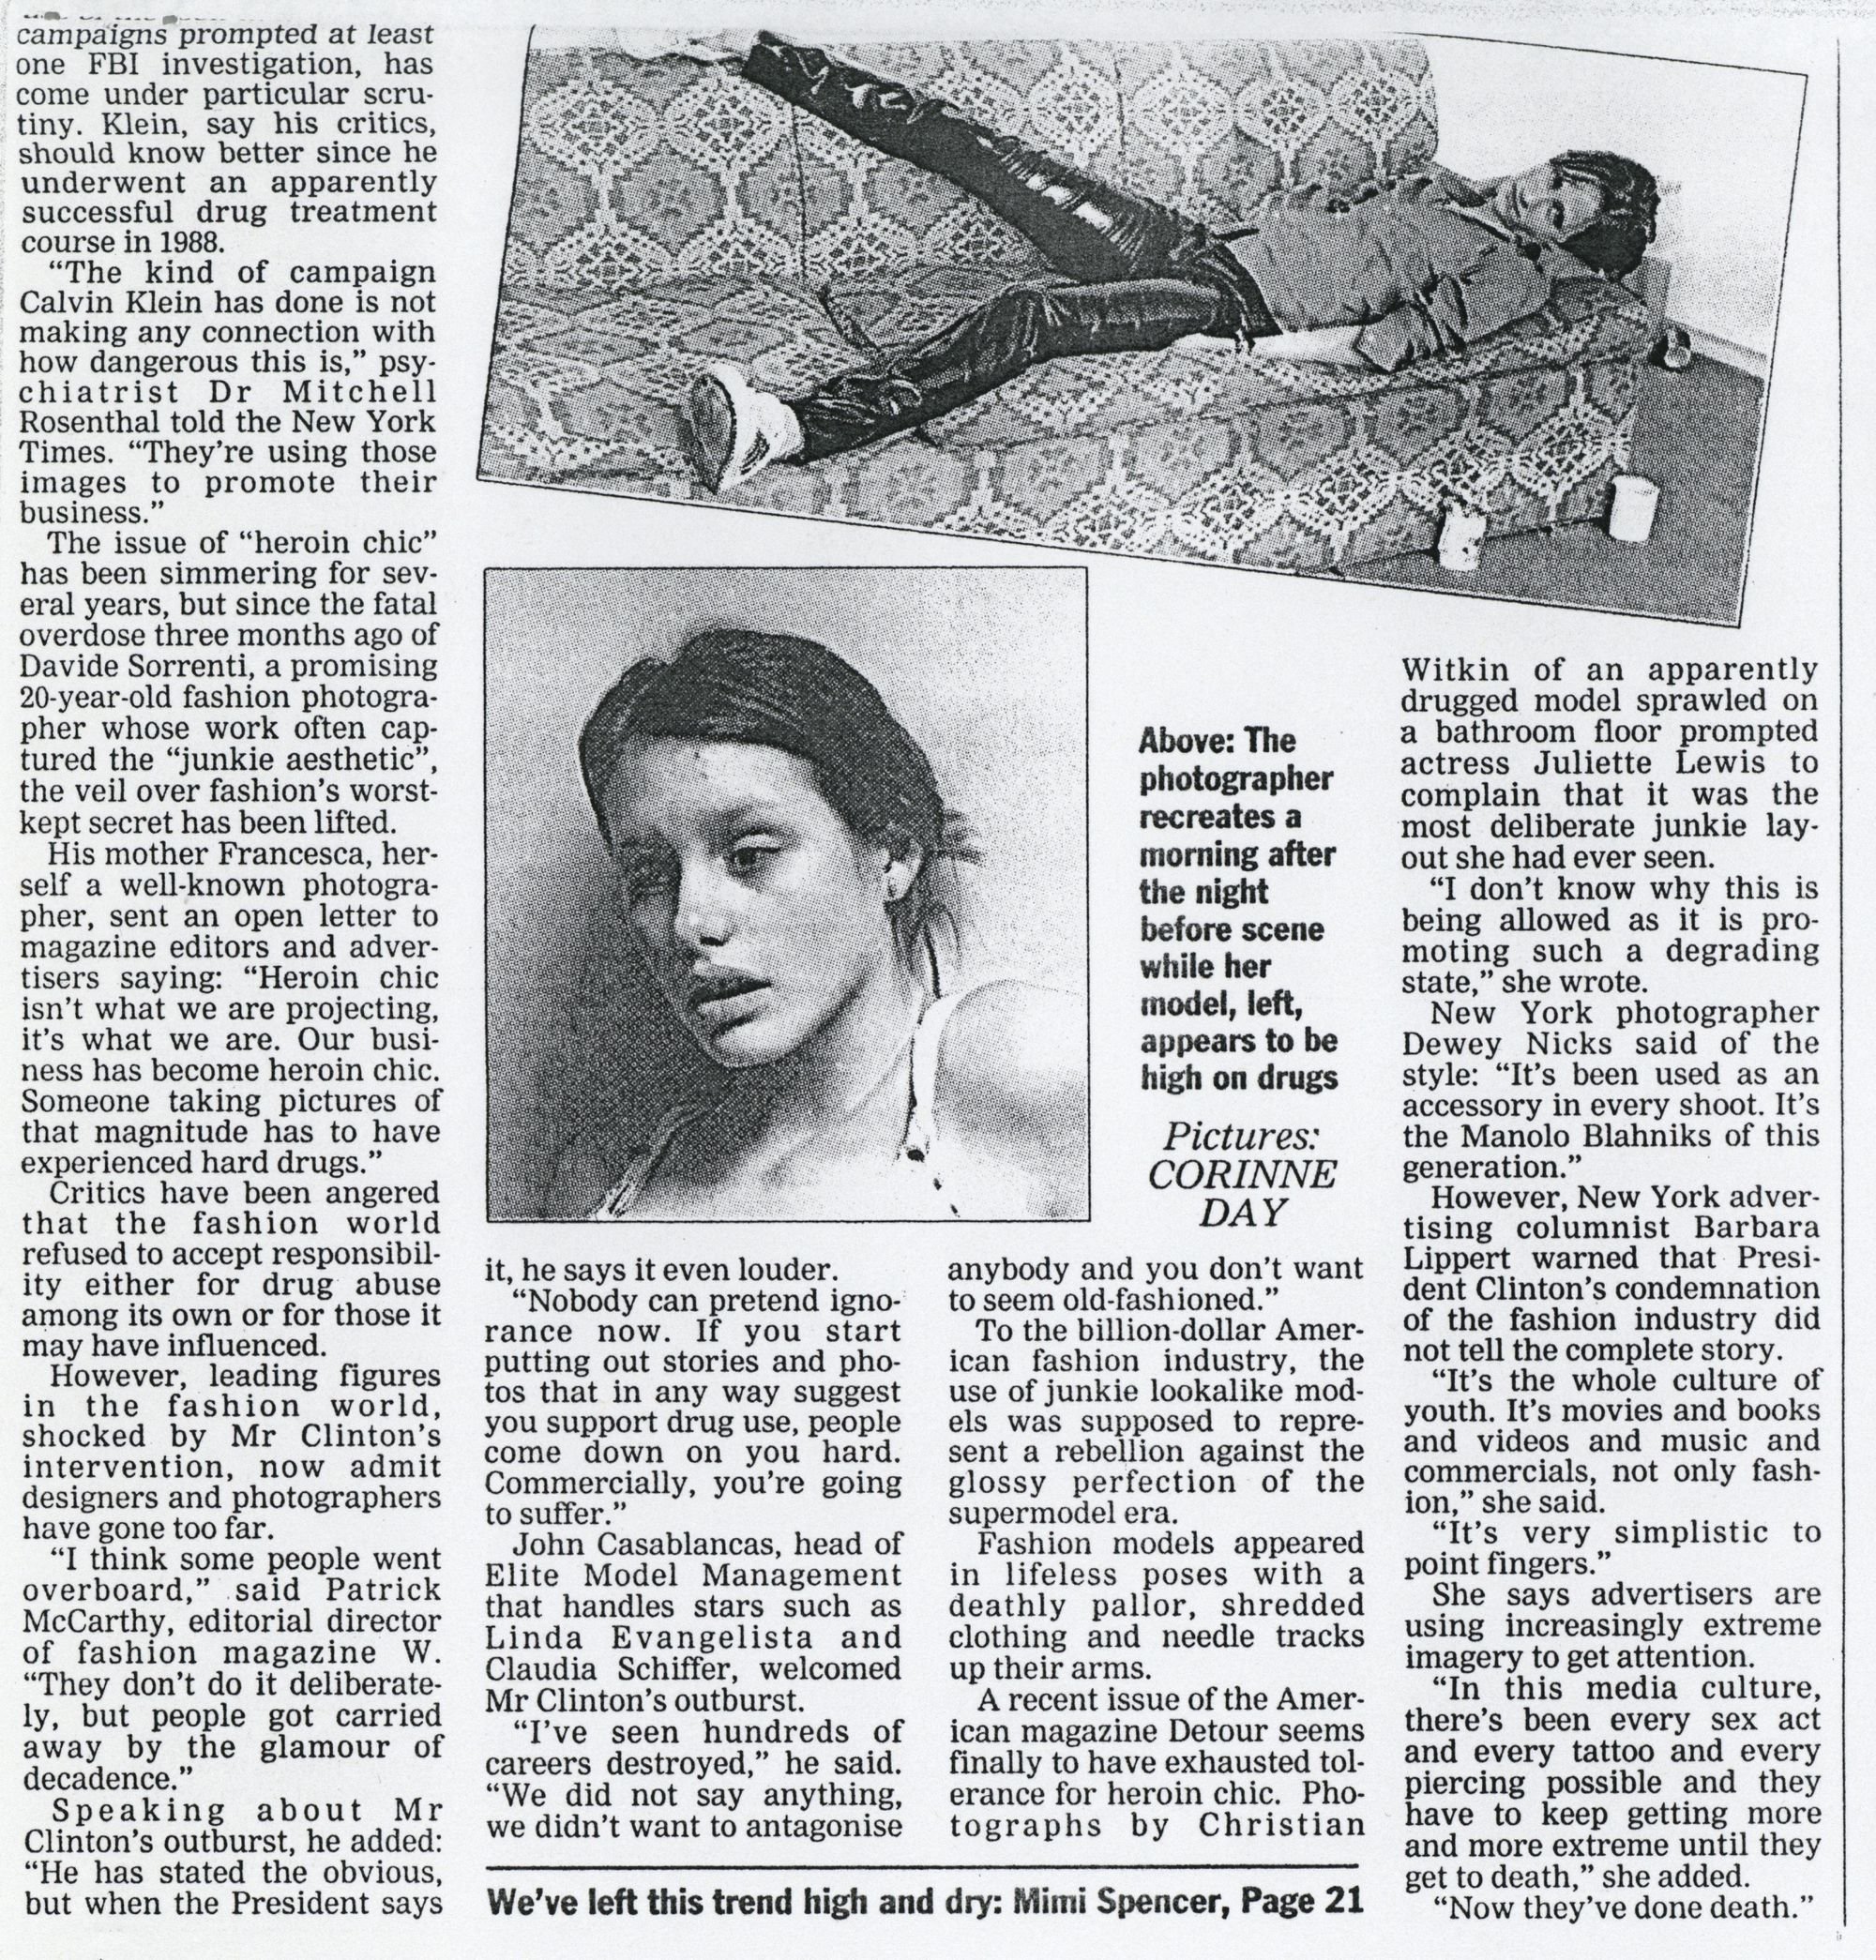 53. EVENING STANDARD THURSDAY 22 MAY 1997 Clinton rages at fashion industry over sick taste for 'heroin chic' P2.jpg